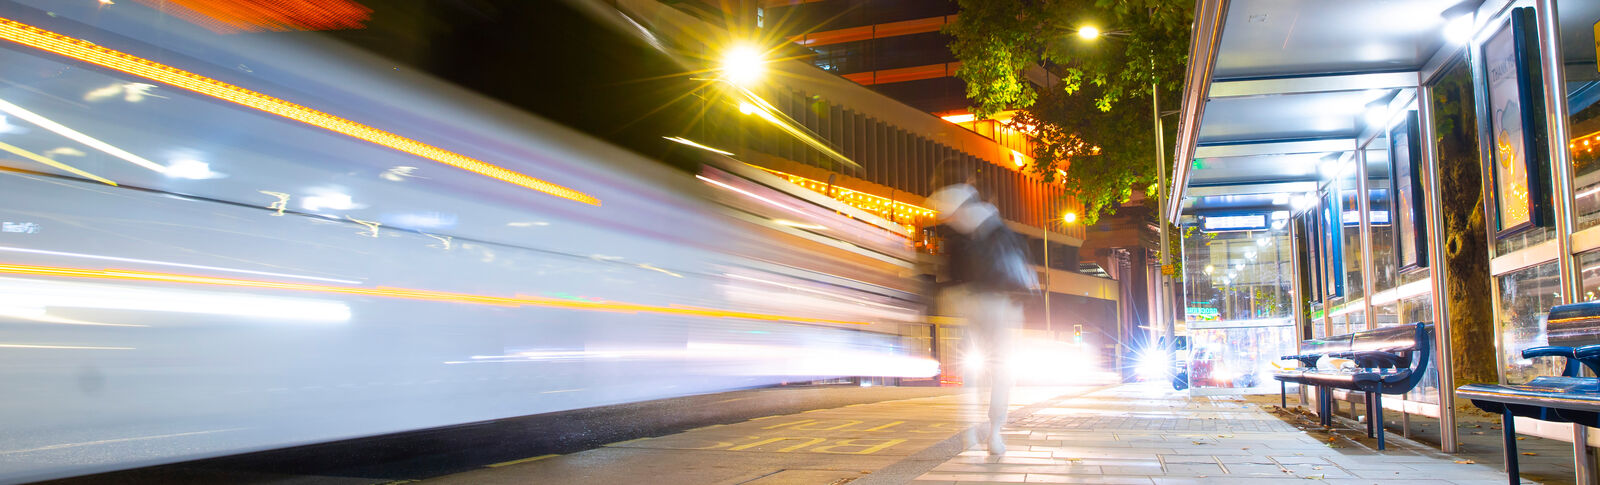 Night time scene of bus passing a bus stop and person walking